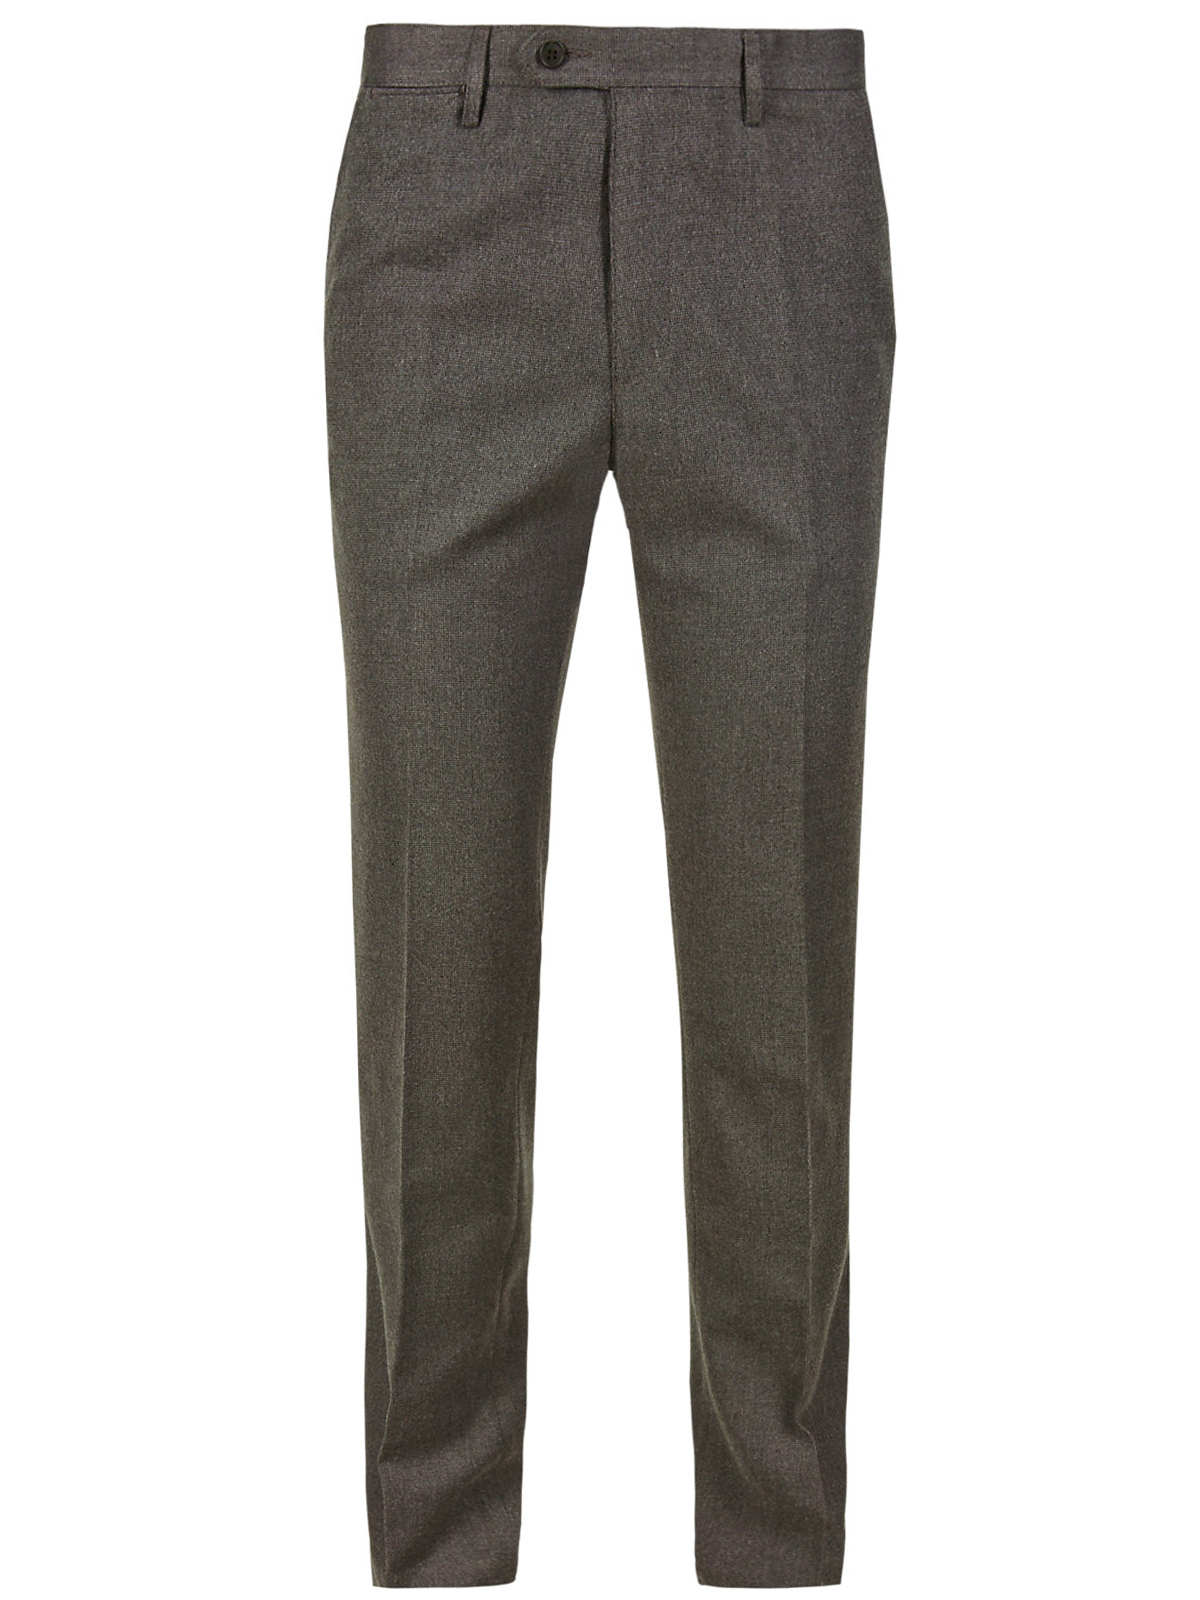 Marks and Spencer - - M&5 GREY Slim Fit Flat Front Trousers - Waist ...